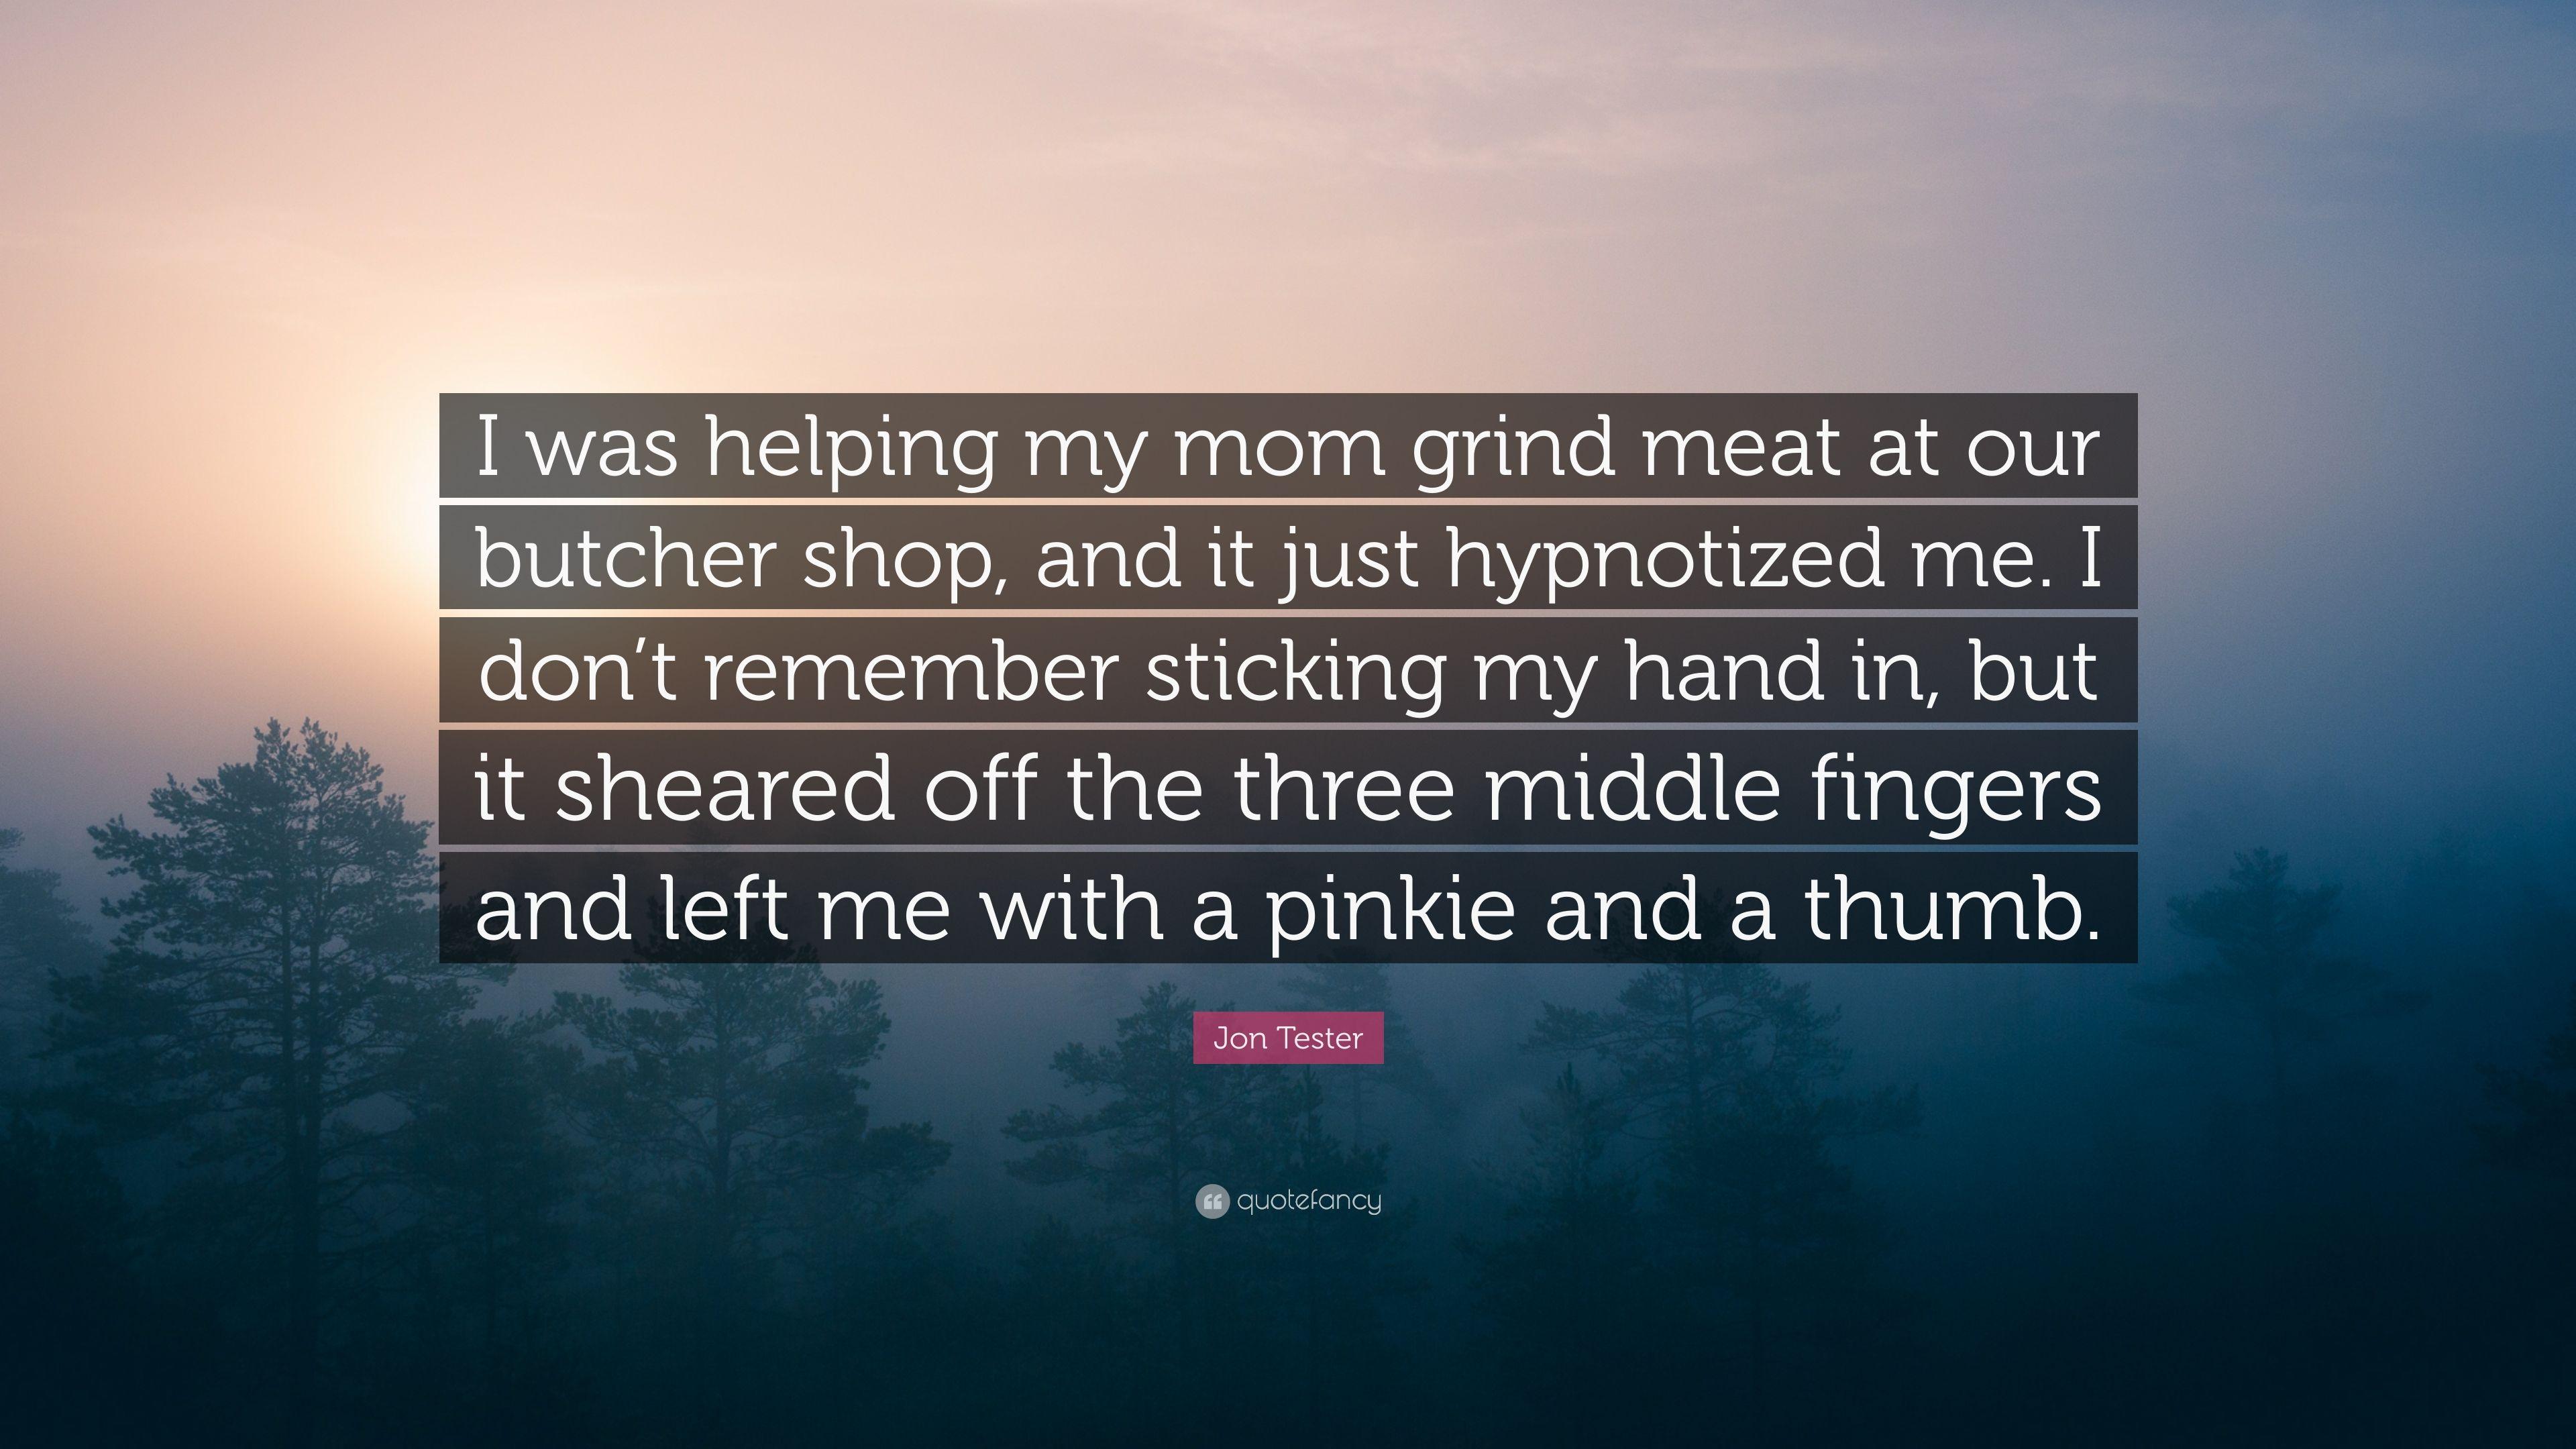 Jon Tester Quote: “I was helping my mom grind meat at our butcher